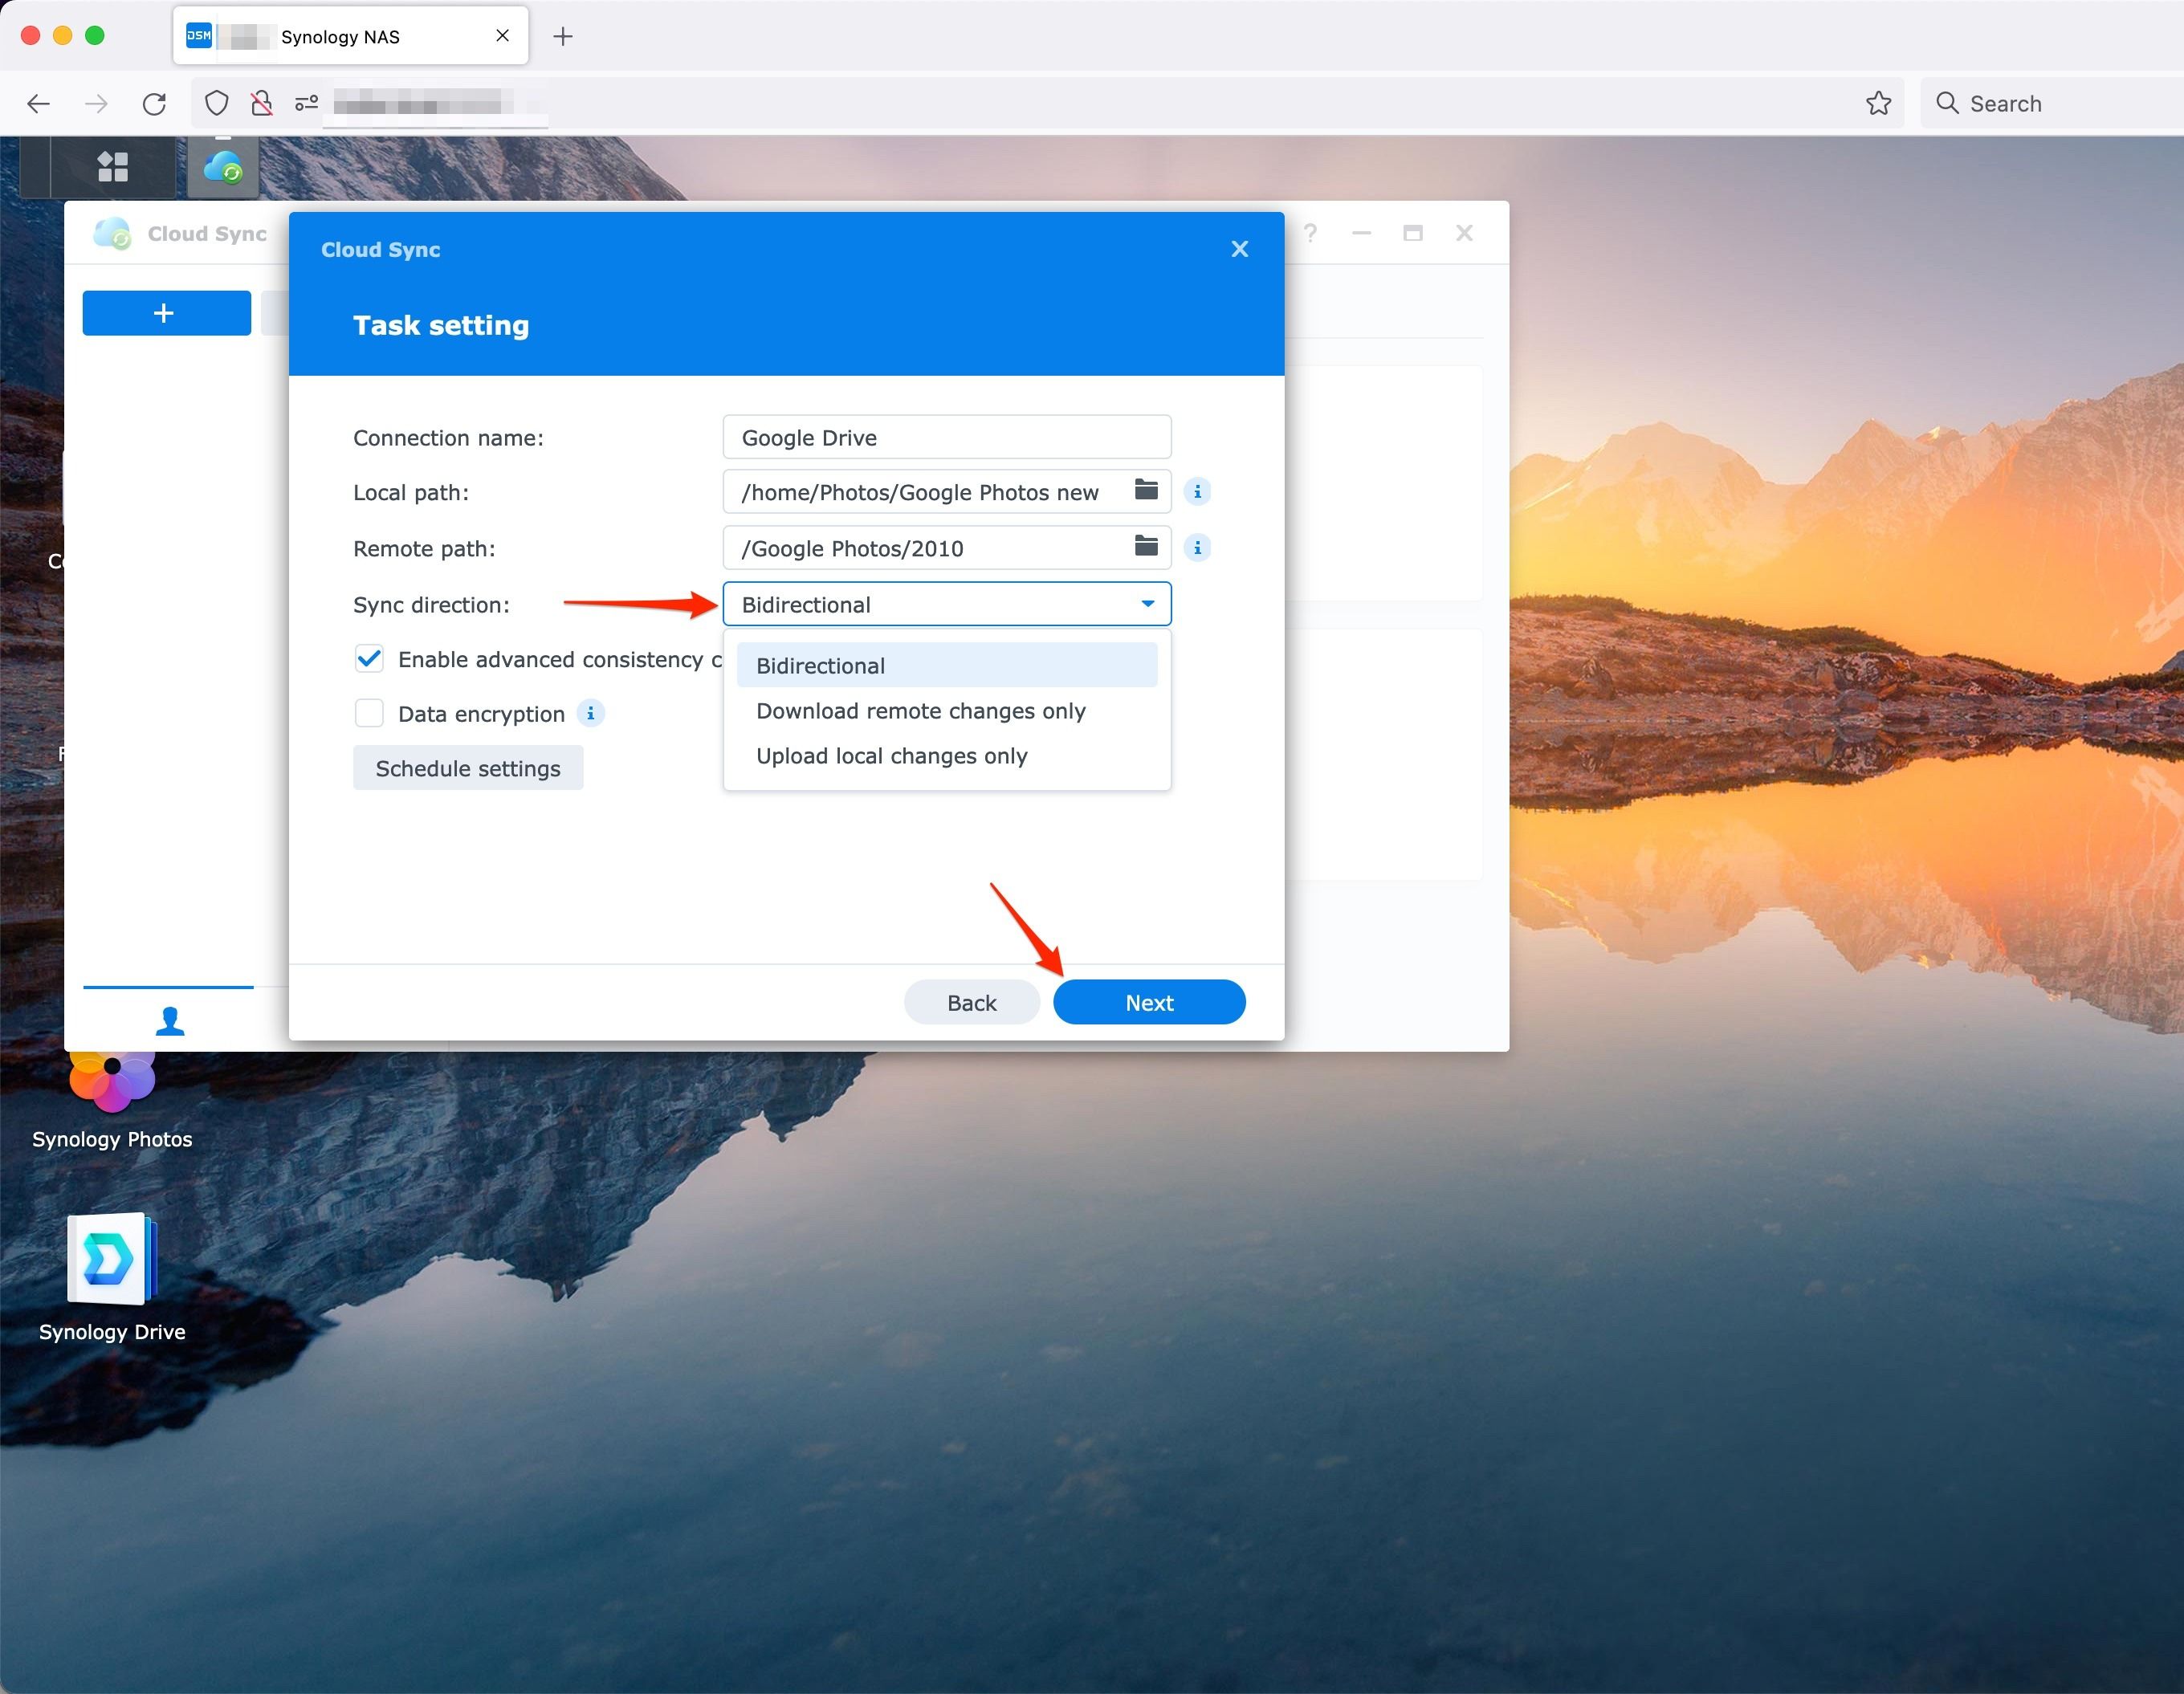 Setting Sync direction in Cloud Sync on Synology NAS